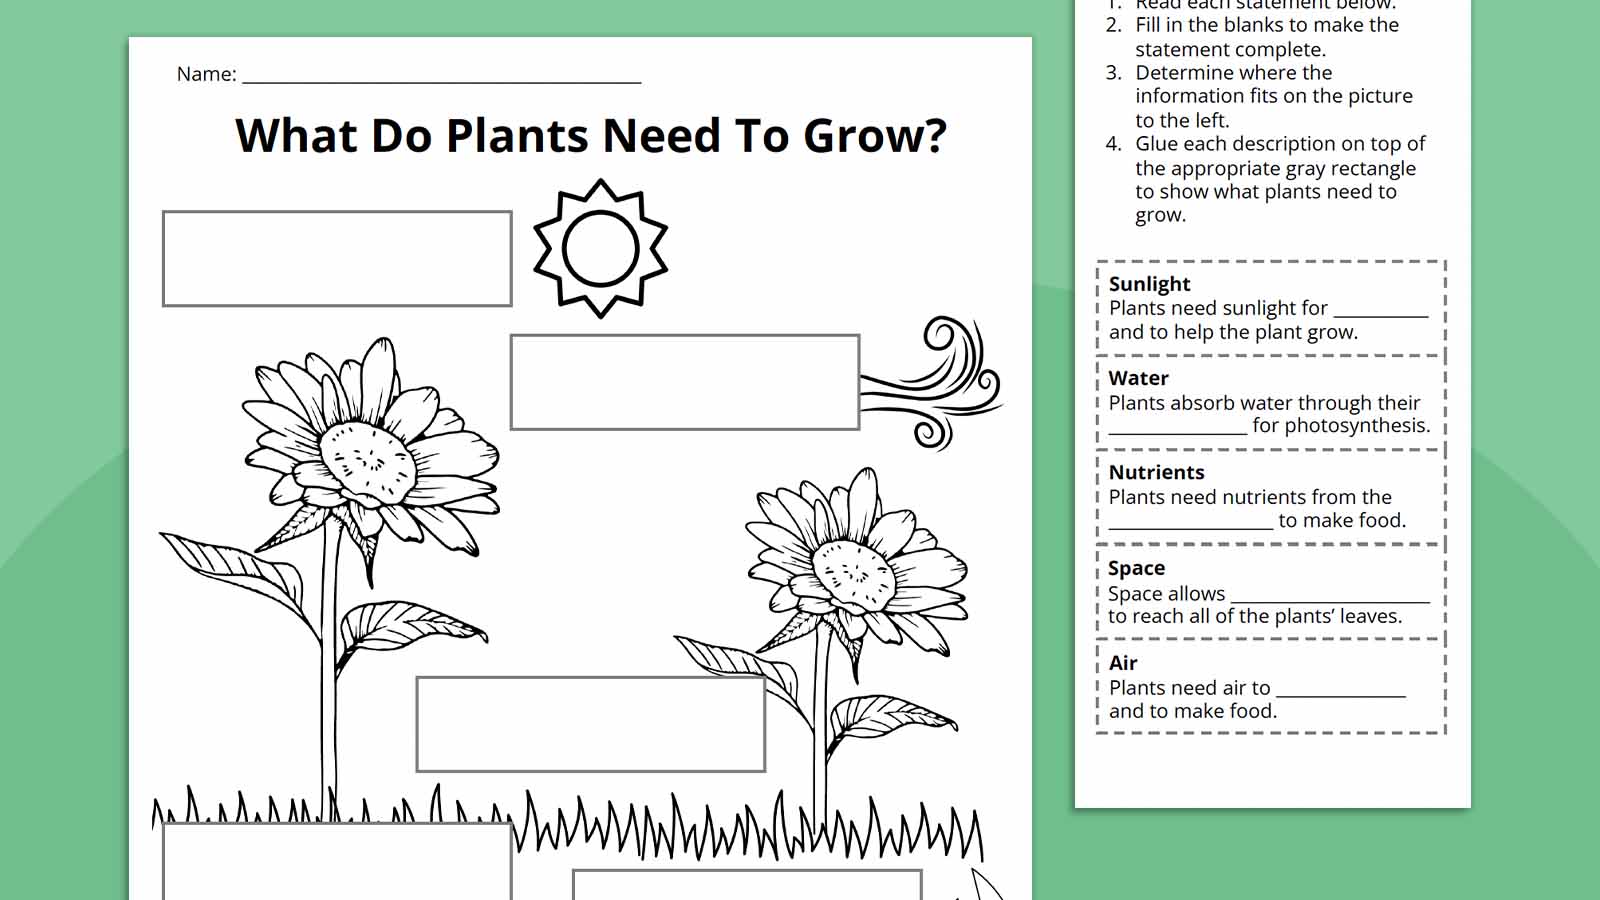 Life Cycle of The Plant What do plants need to grow?